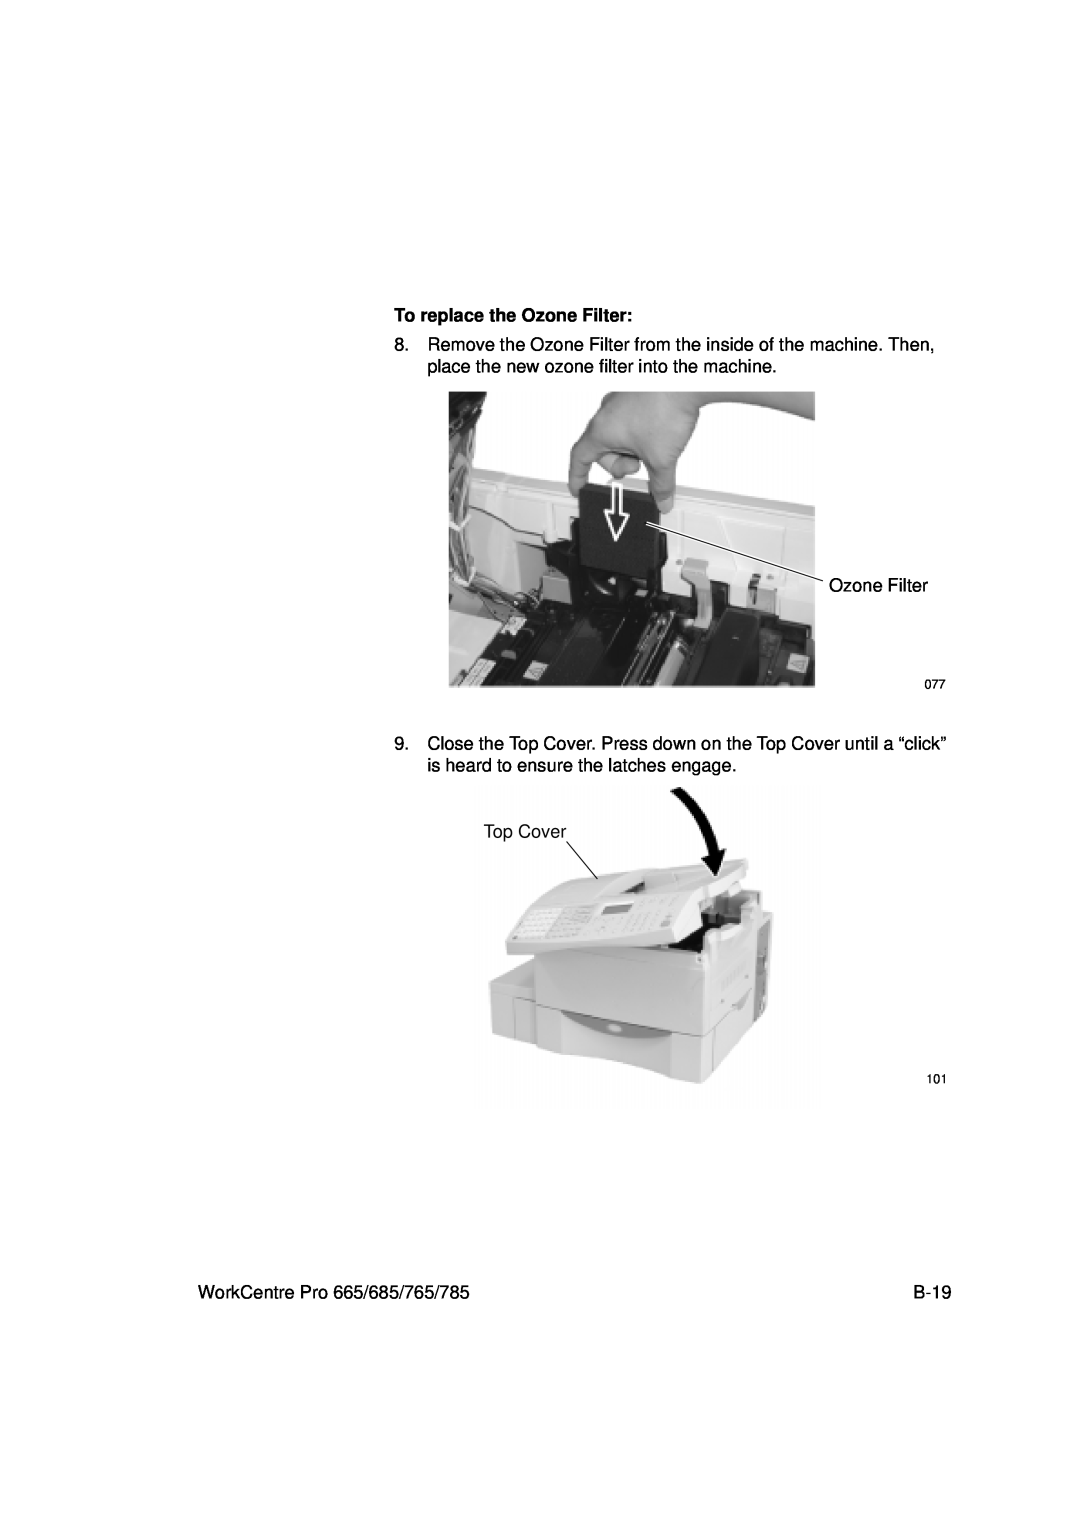 Xerox manual To replace the Ozone Filter, Top Cover, WorkCentre Pro 665/685/765/785, B-19 